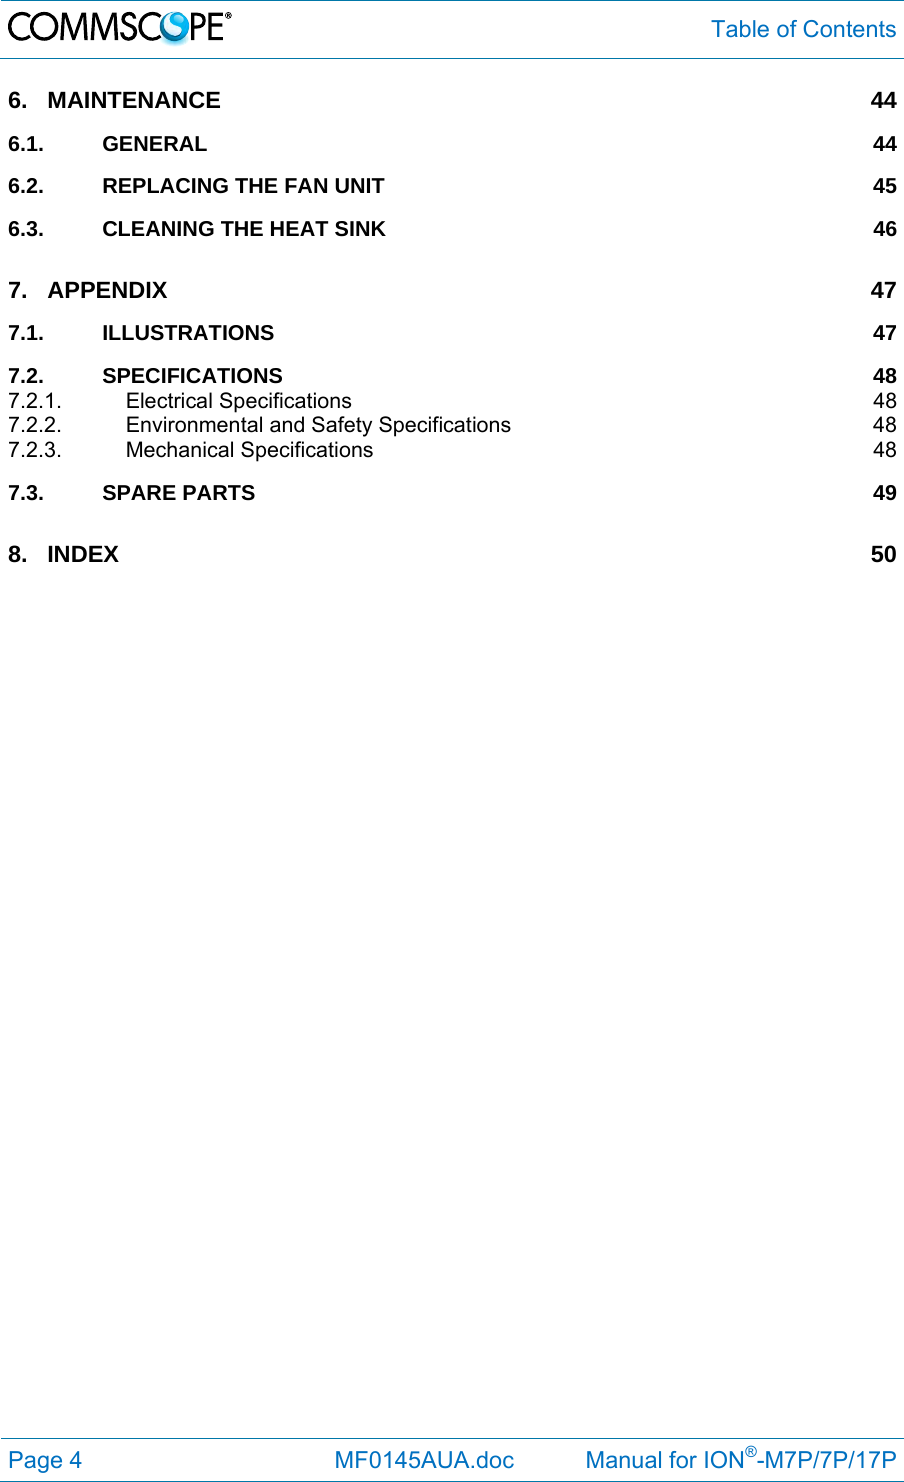  Table of Contents Page 4              MF0145AUA.doc           Manual for ION®-M7P/7P/17P 6.MAINTENANCE 446.1.GENERAL 446.2.REPLACING THE FAN UNIT  456.3.CLEANING THE HEAT SINK  467.APPENDIX 477.1.ILLUSTRATIONS 477.2.SPECIFICATIONS 487.2.1.Electrical Specifications  487.2.2.Environmental and Safety Specifications  487.2.3.Mechanical Specifications  487.3.SPARE PARTS  498.INDEX 50 